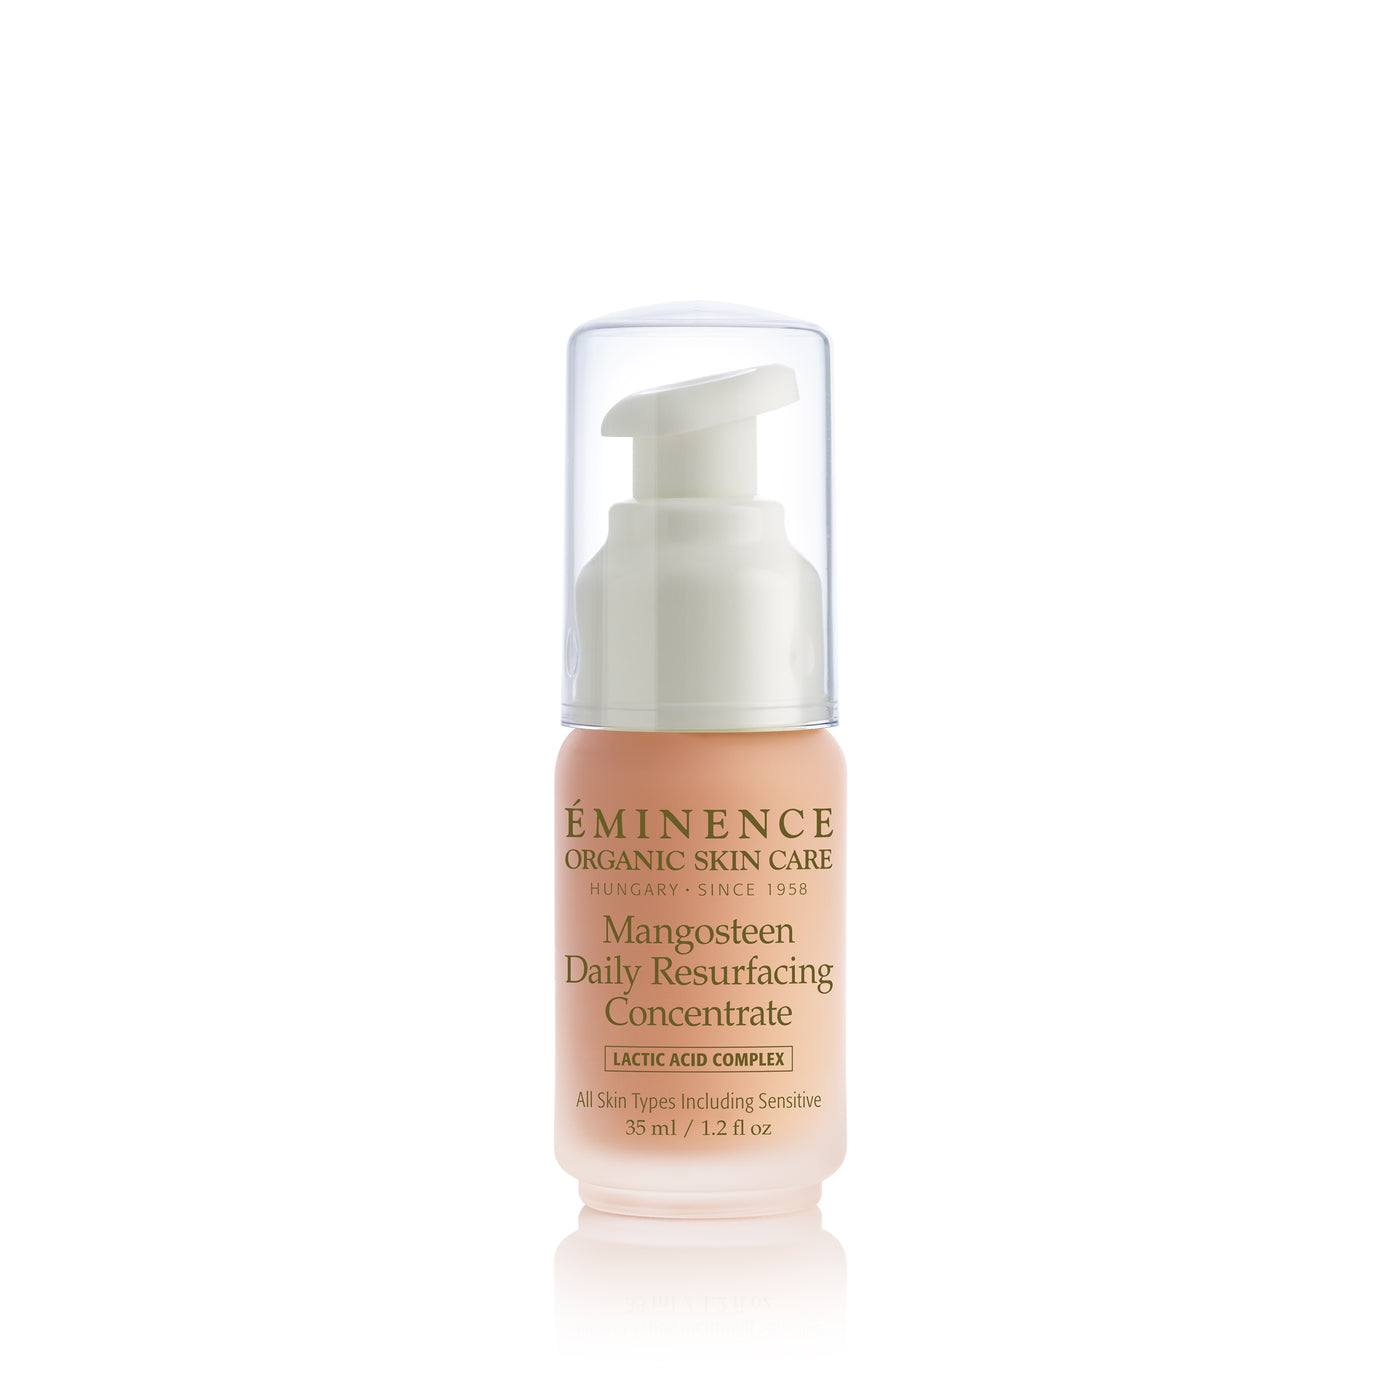 Eminence Organics Mangosteen Daily Resurfacing Concentrate - Radiance Clean Beauty